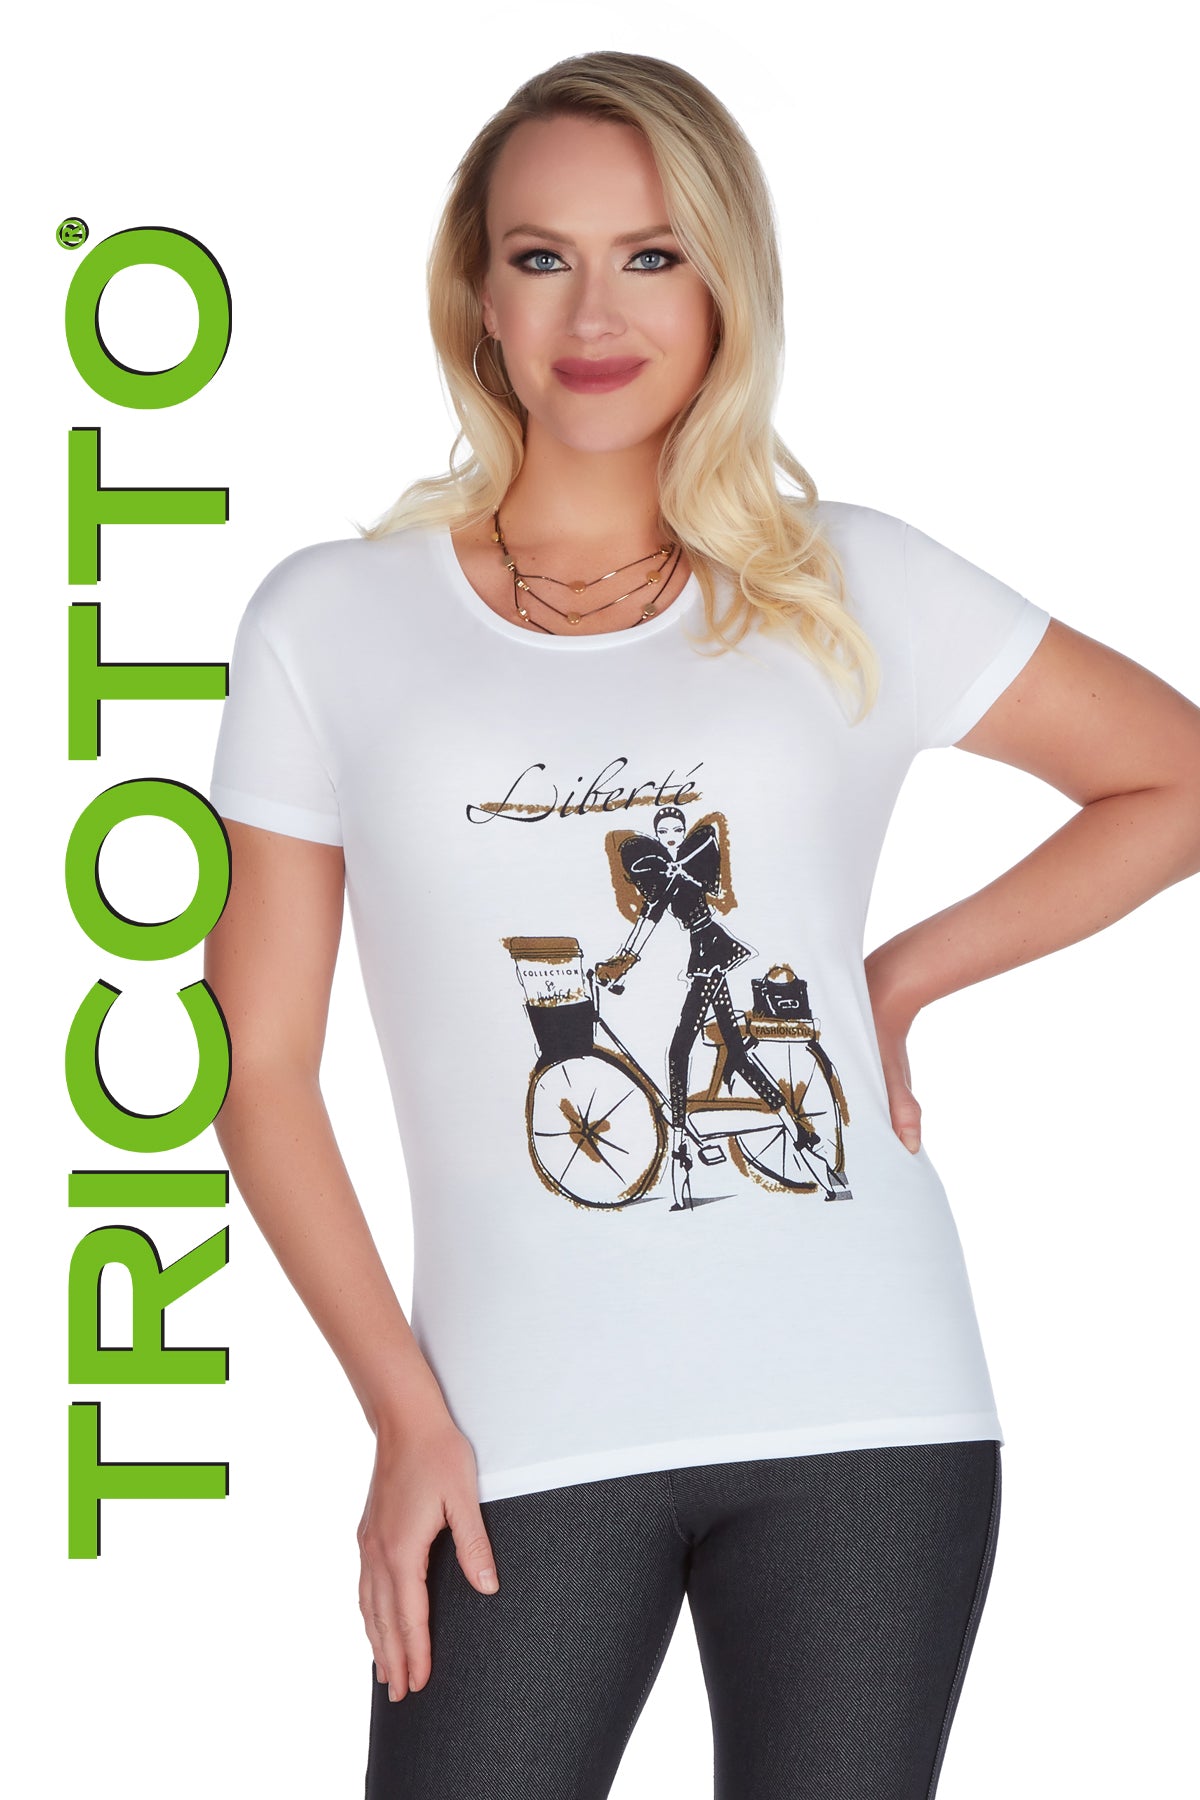 Tricotto Bicycle T-shirt-Buy Tricotto T-shirts Online-Tricotto Online T-shirt Shop